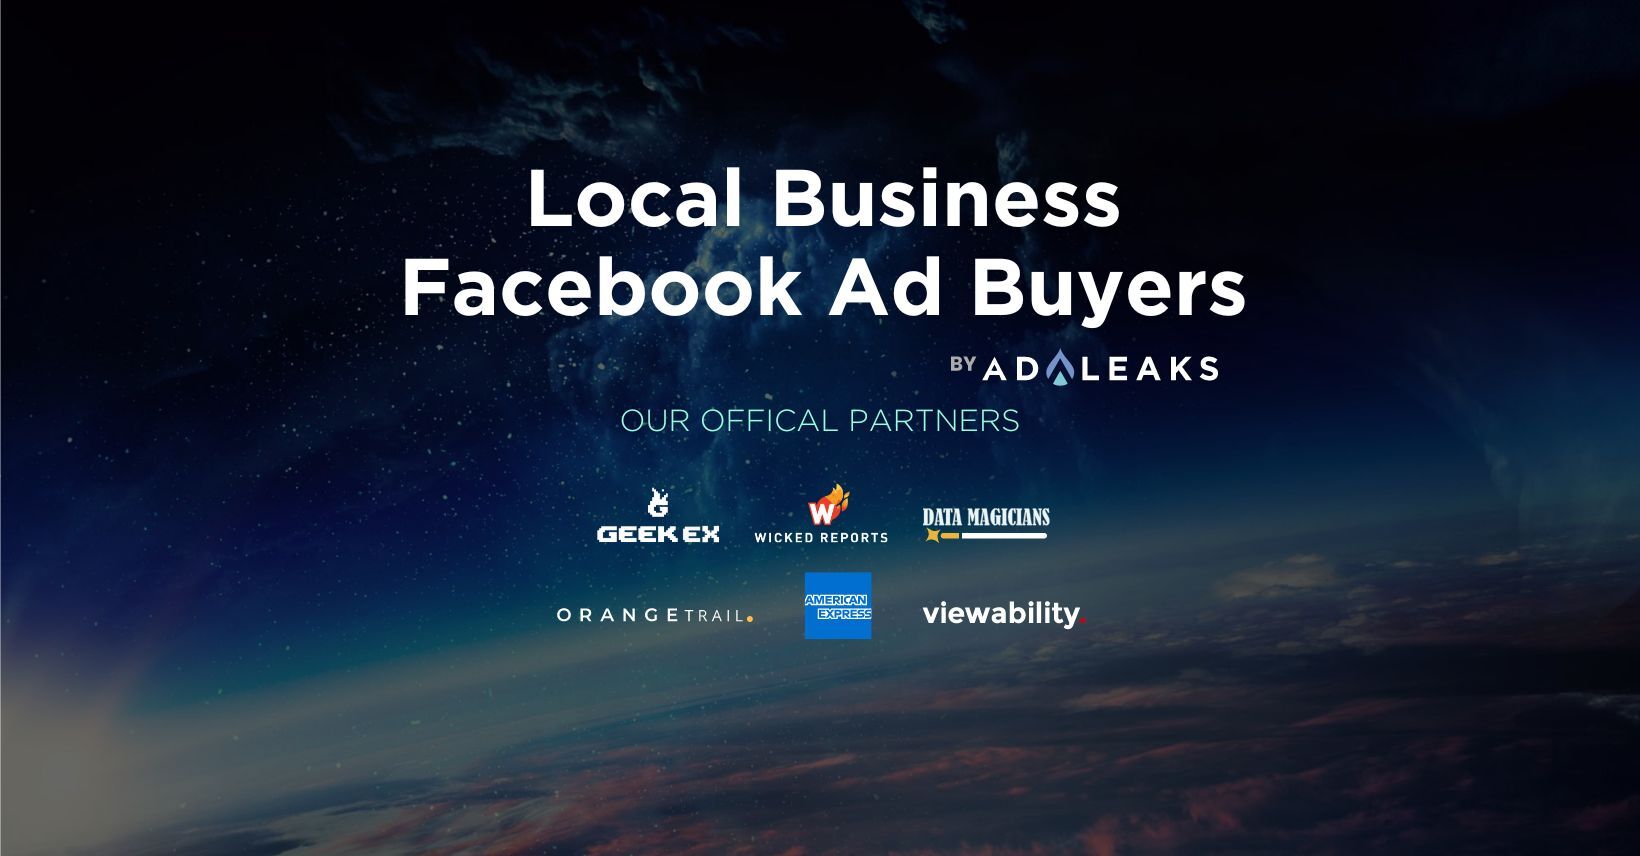 local business ad buyers facebook banner